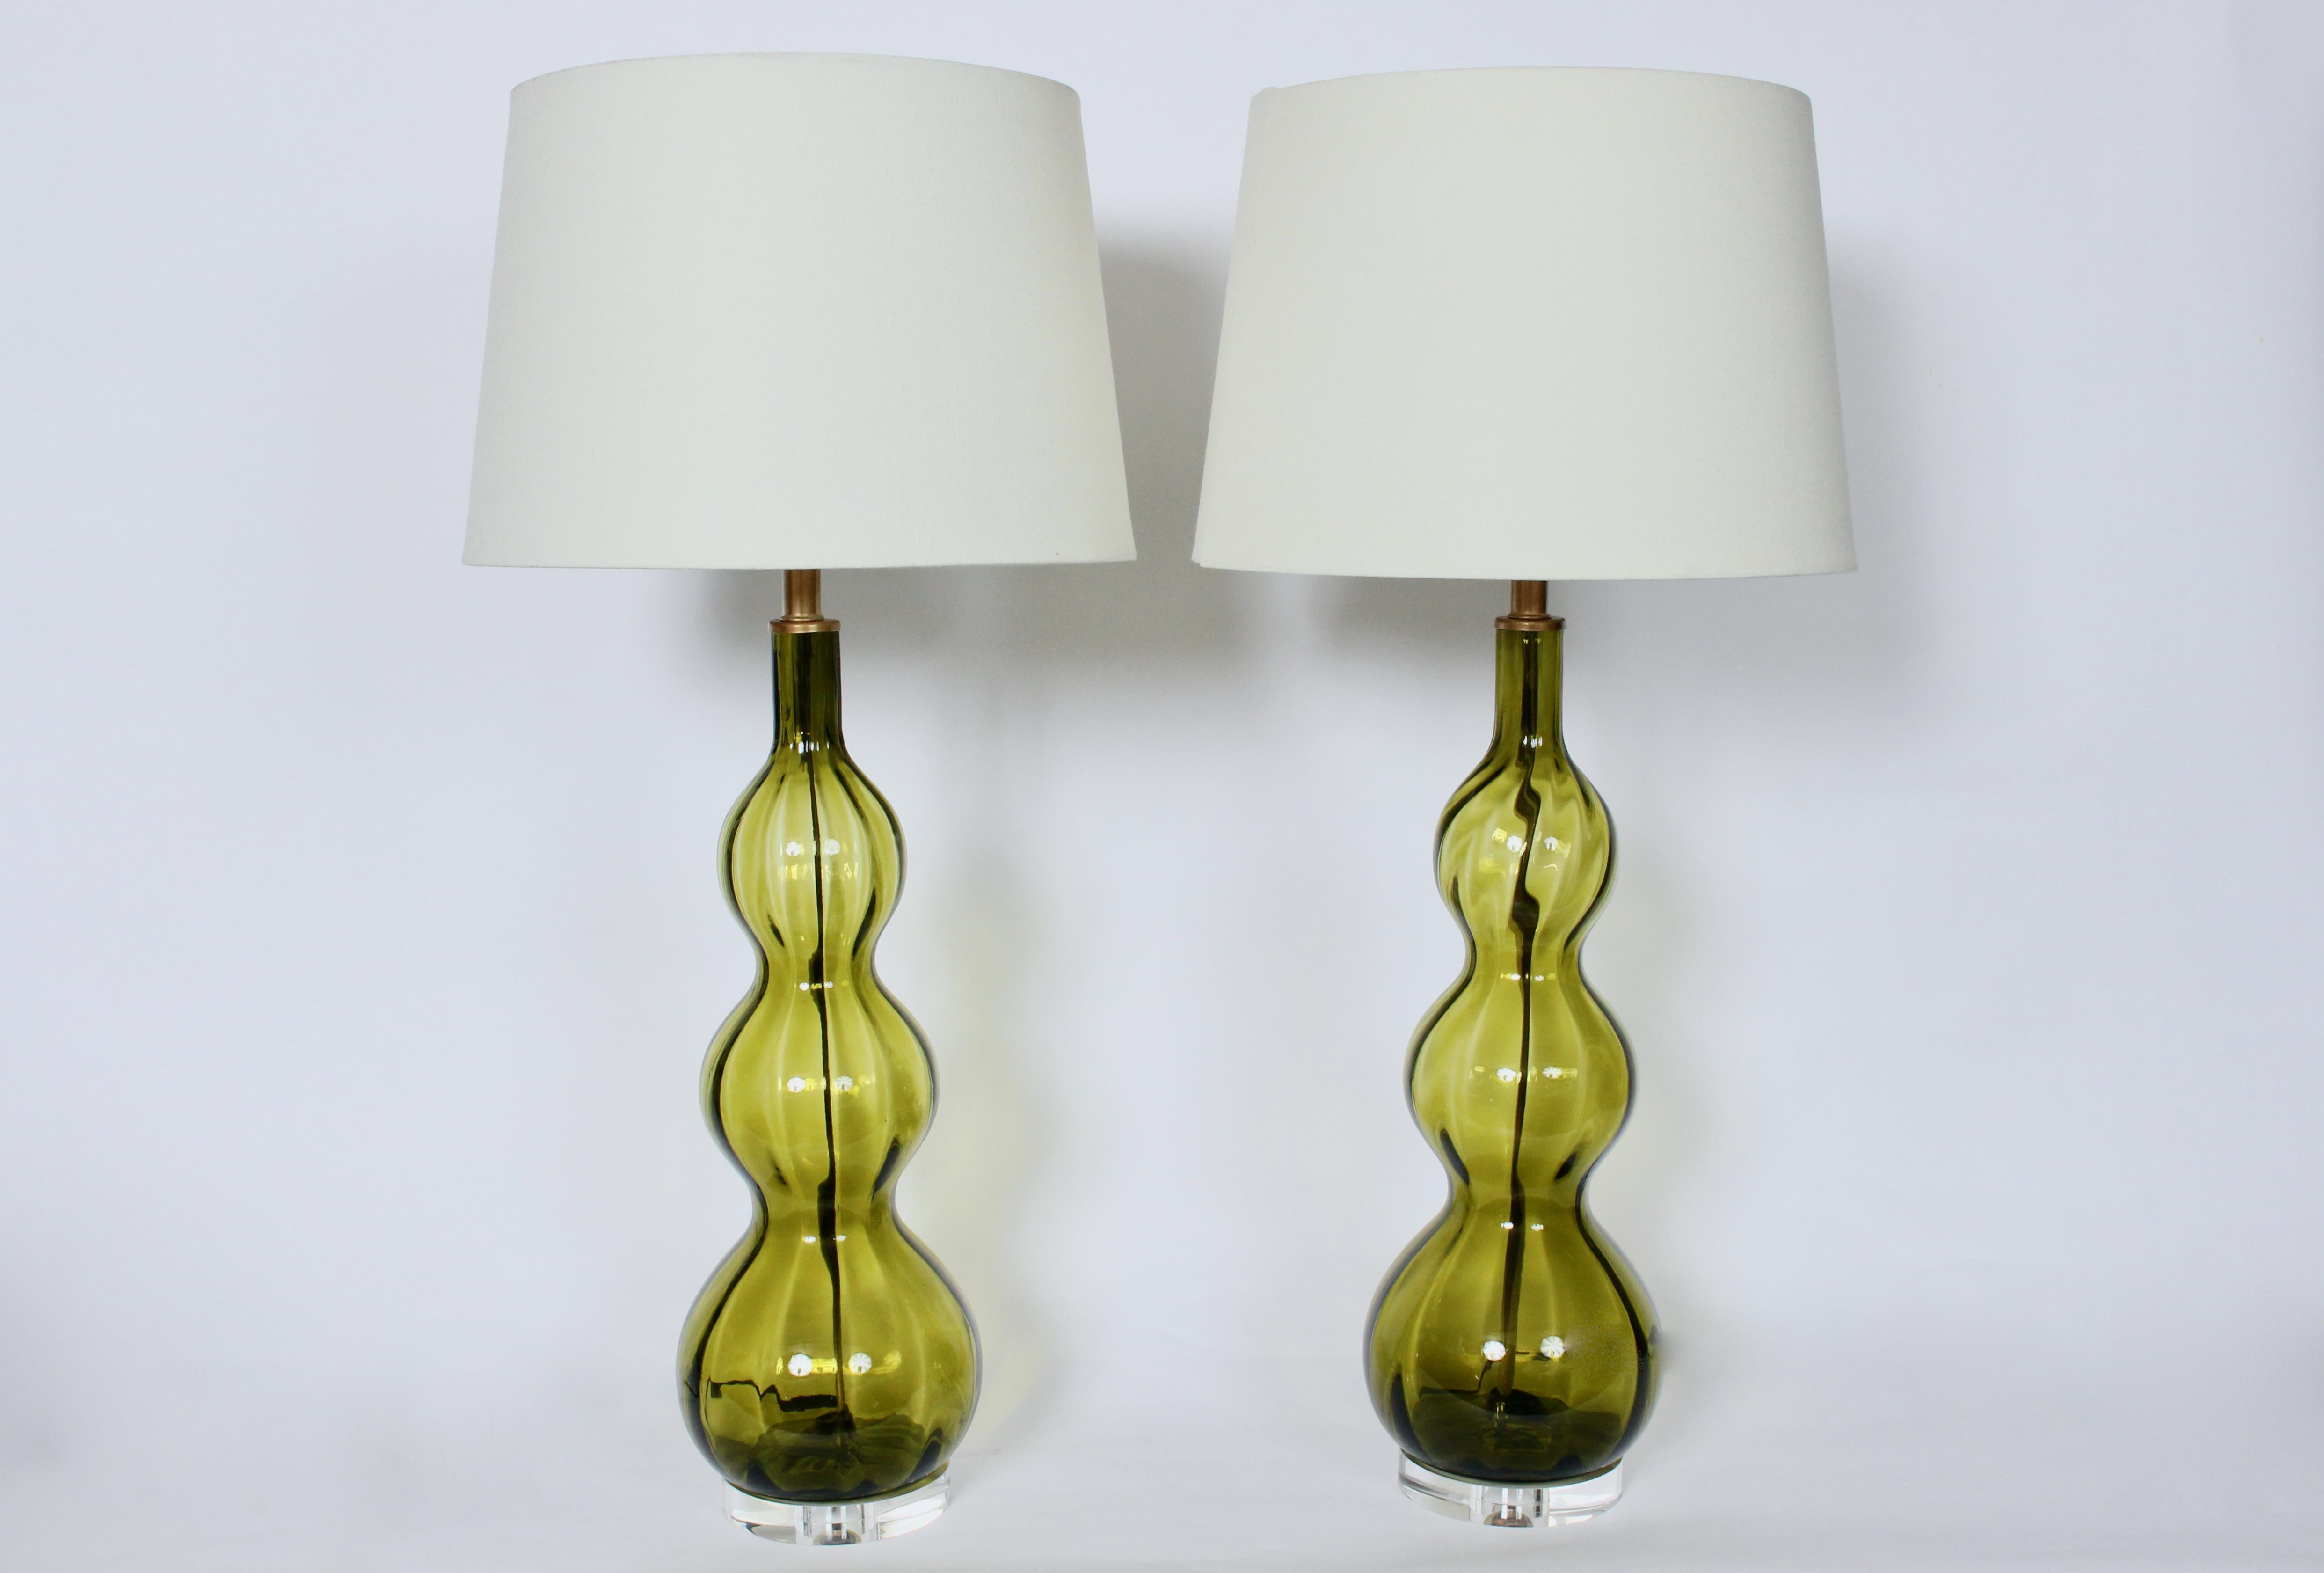 Tall Pair of Stacked Triple Gourd Olive Green Art Glass Table Lamps, 1950s For Sale 9